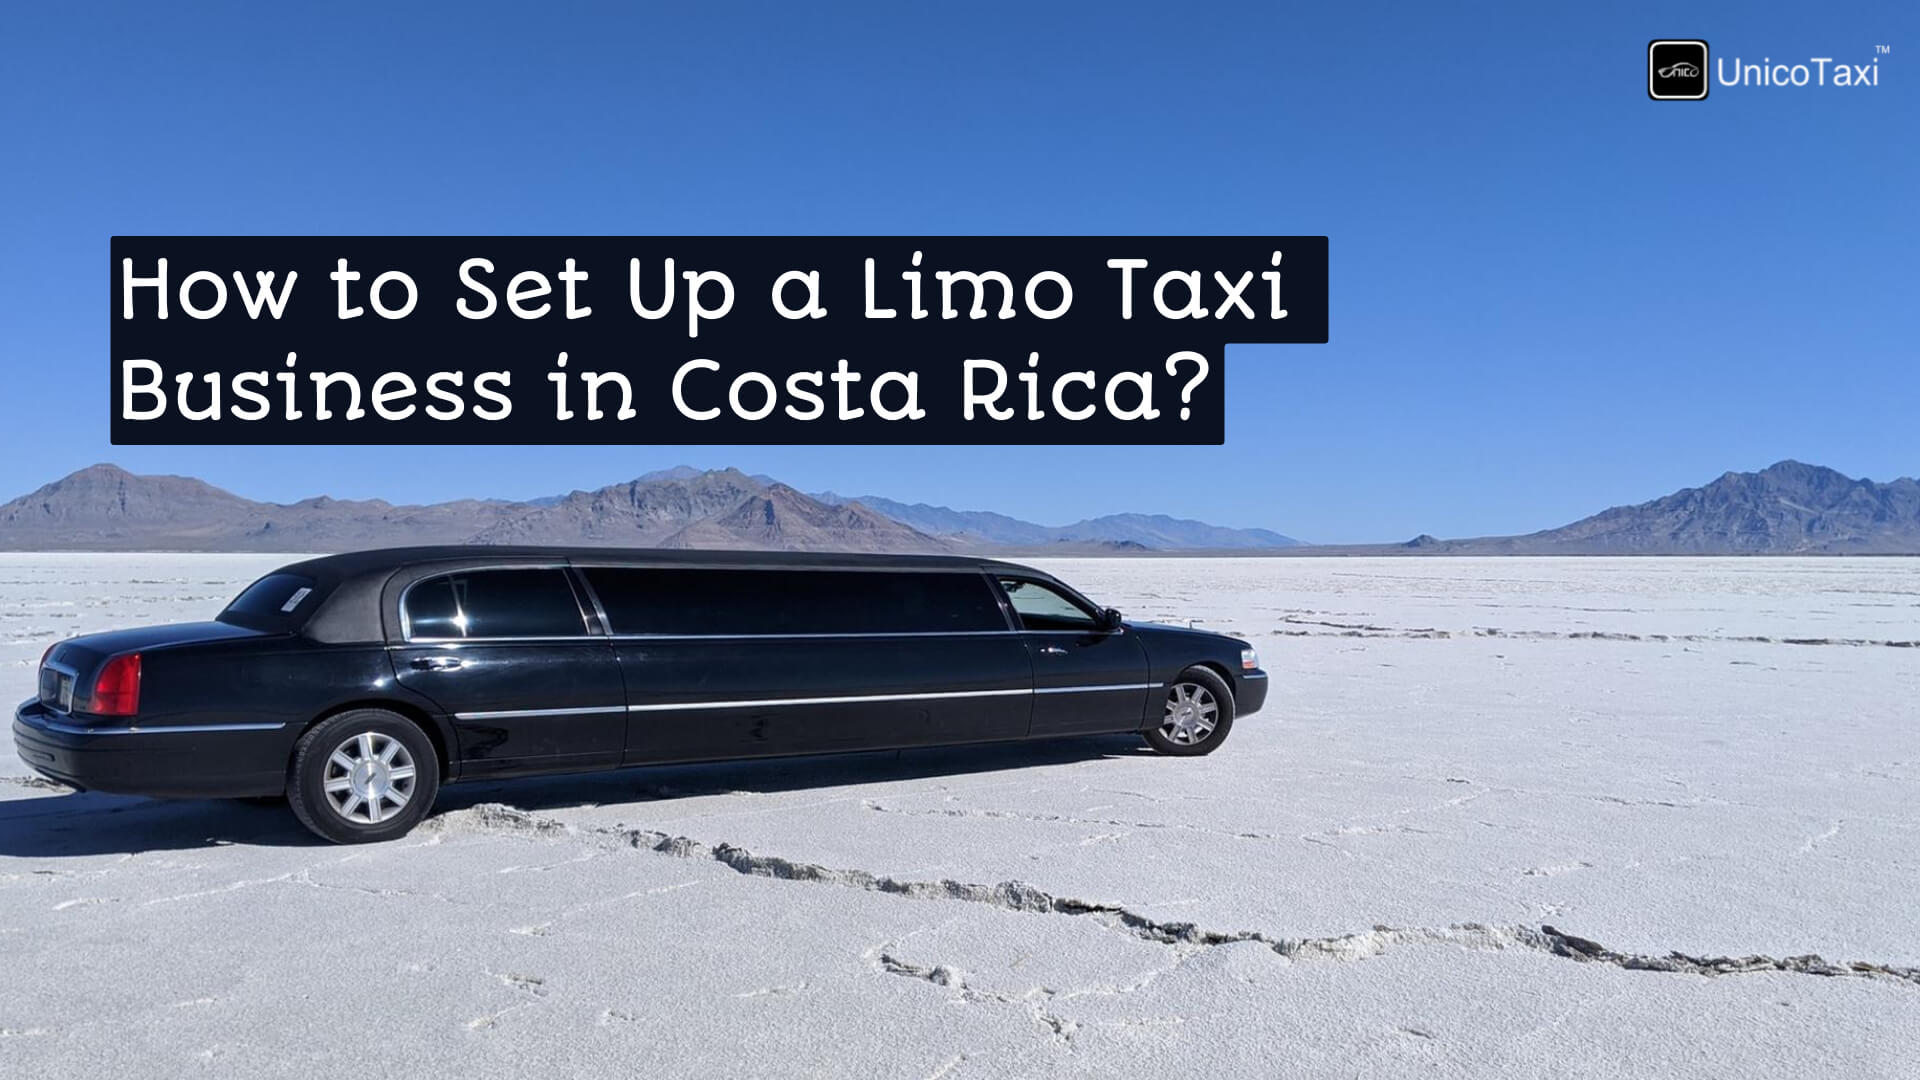 How to Set Up a Limo Taxi Business in Costa Rica?